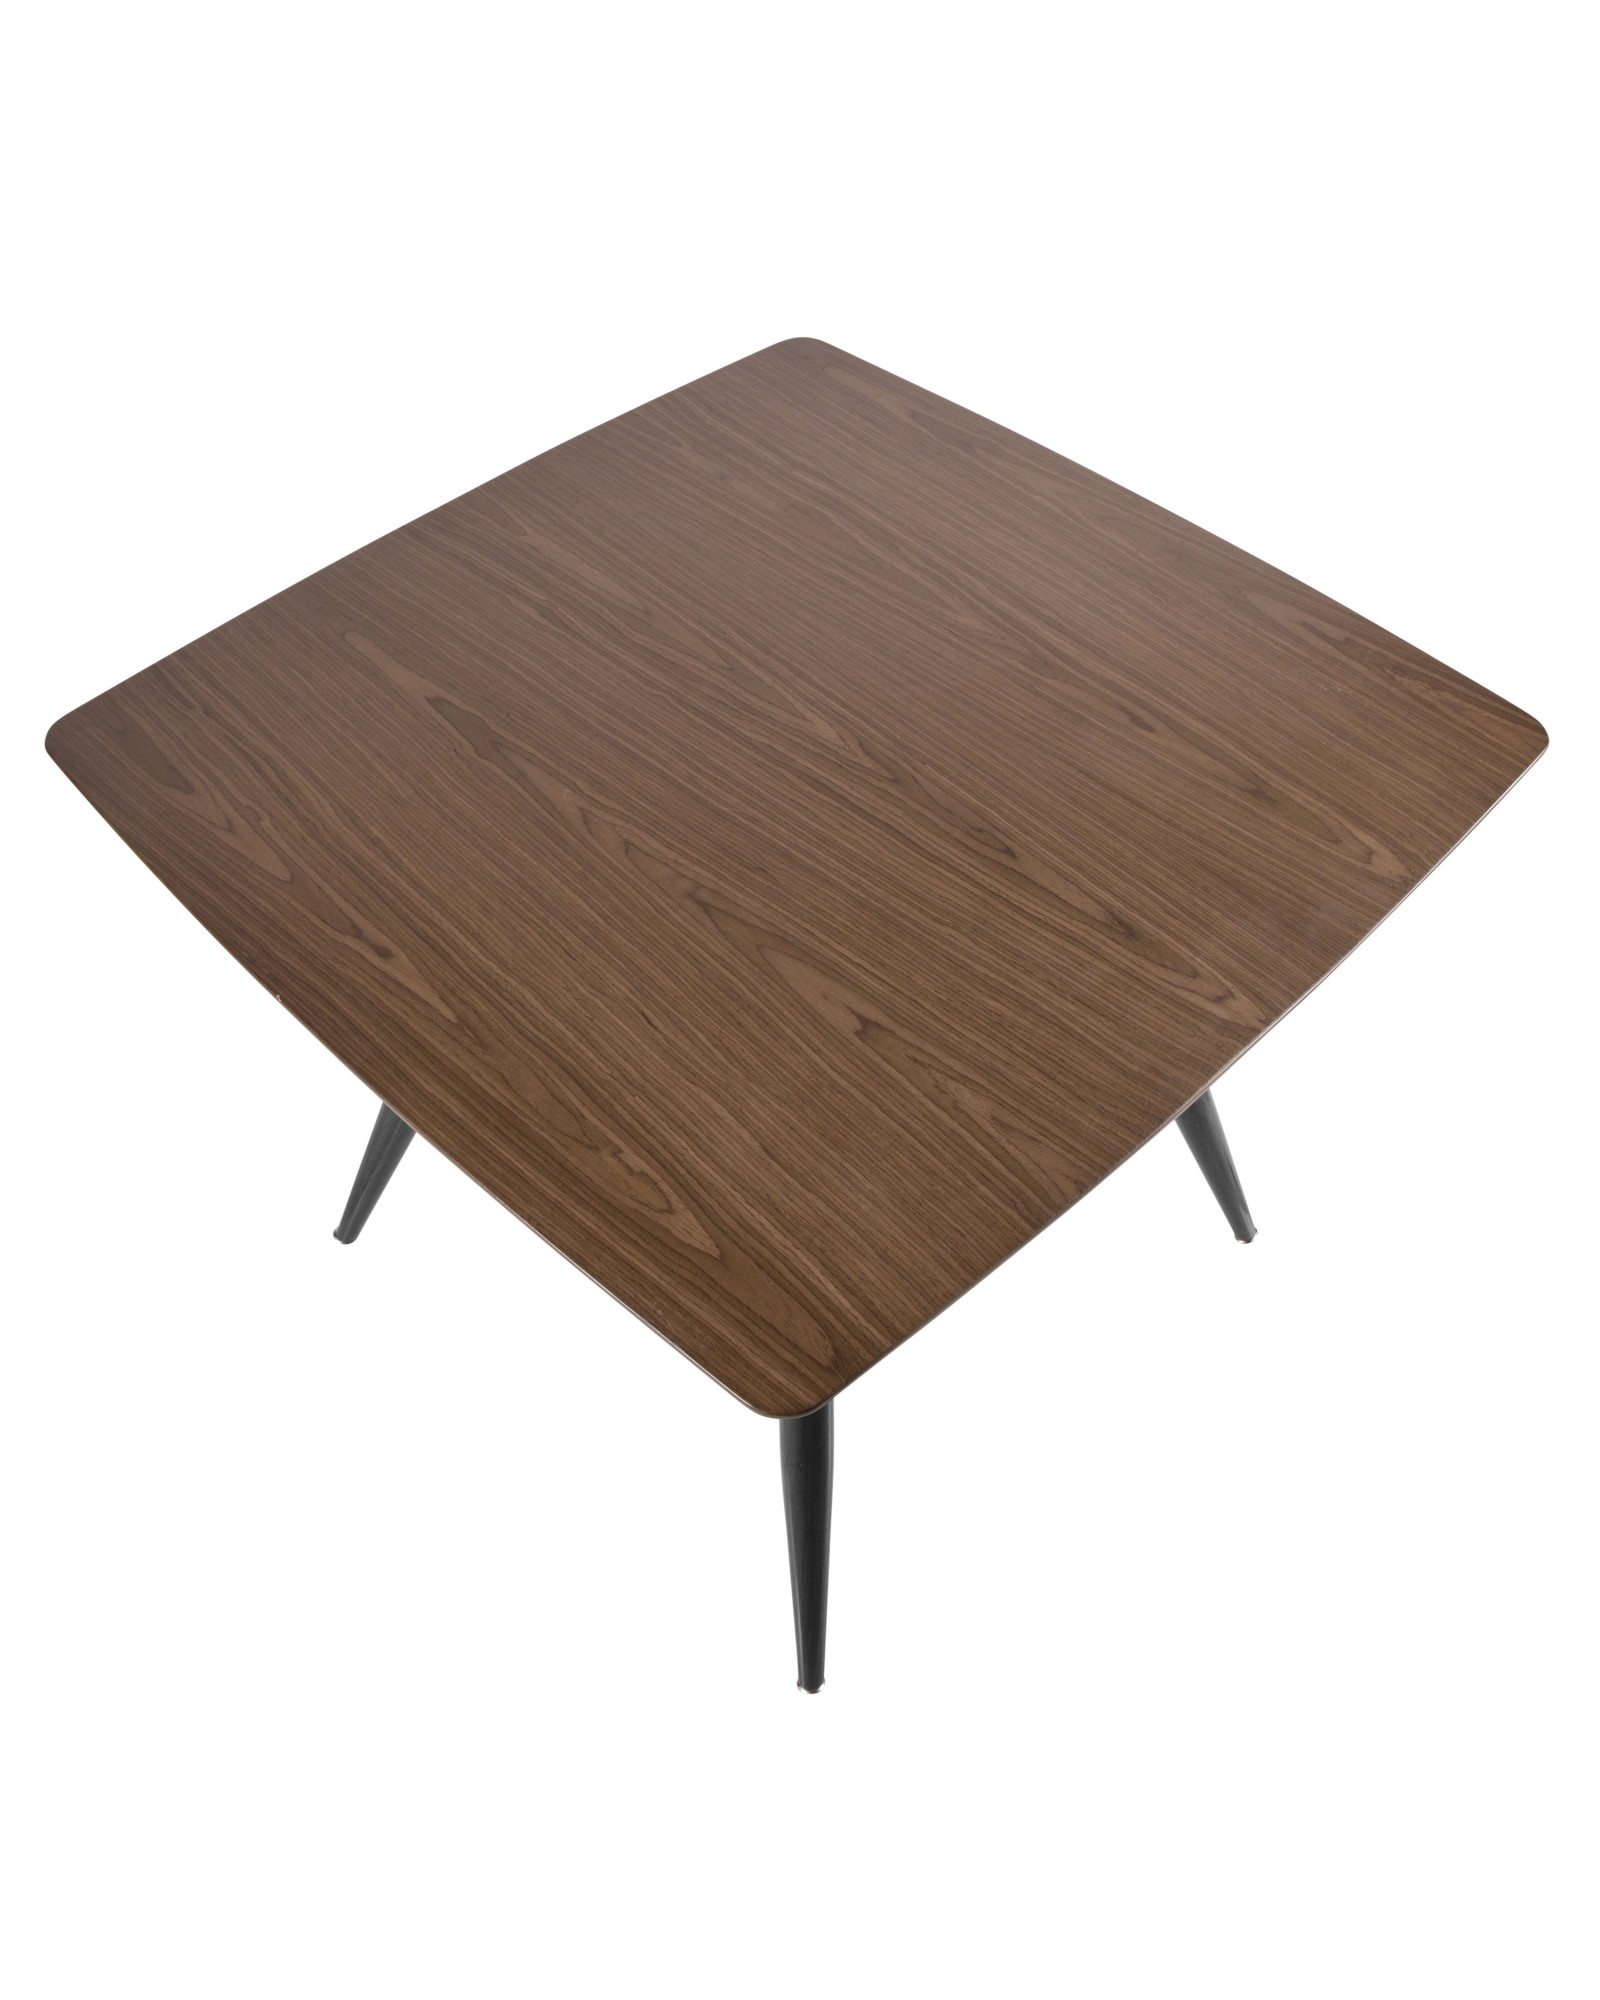 Clara Mid-Century Modern Square Dining Table with Black Metal Legs and Walnut Wood Top